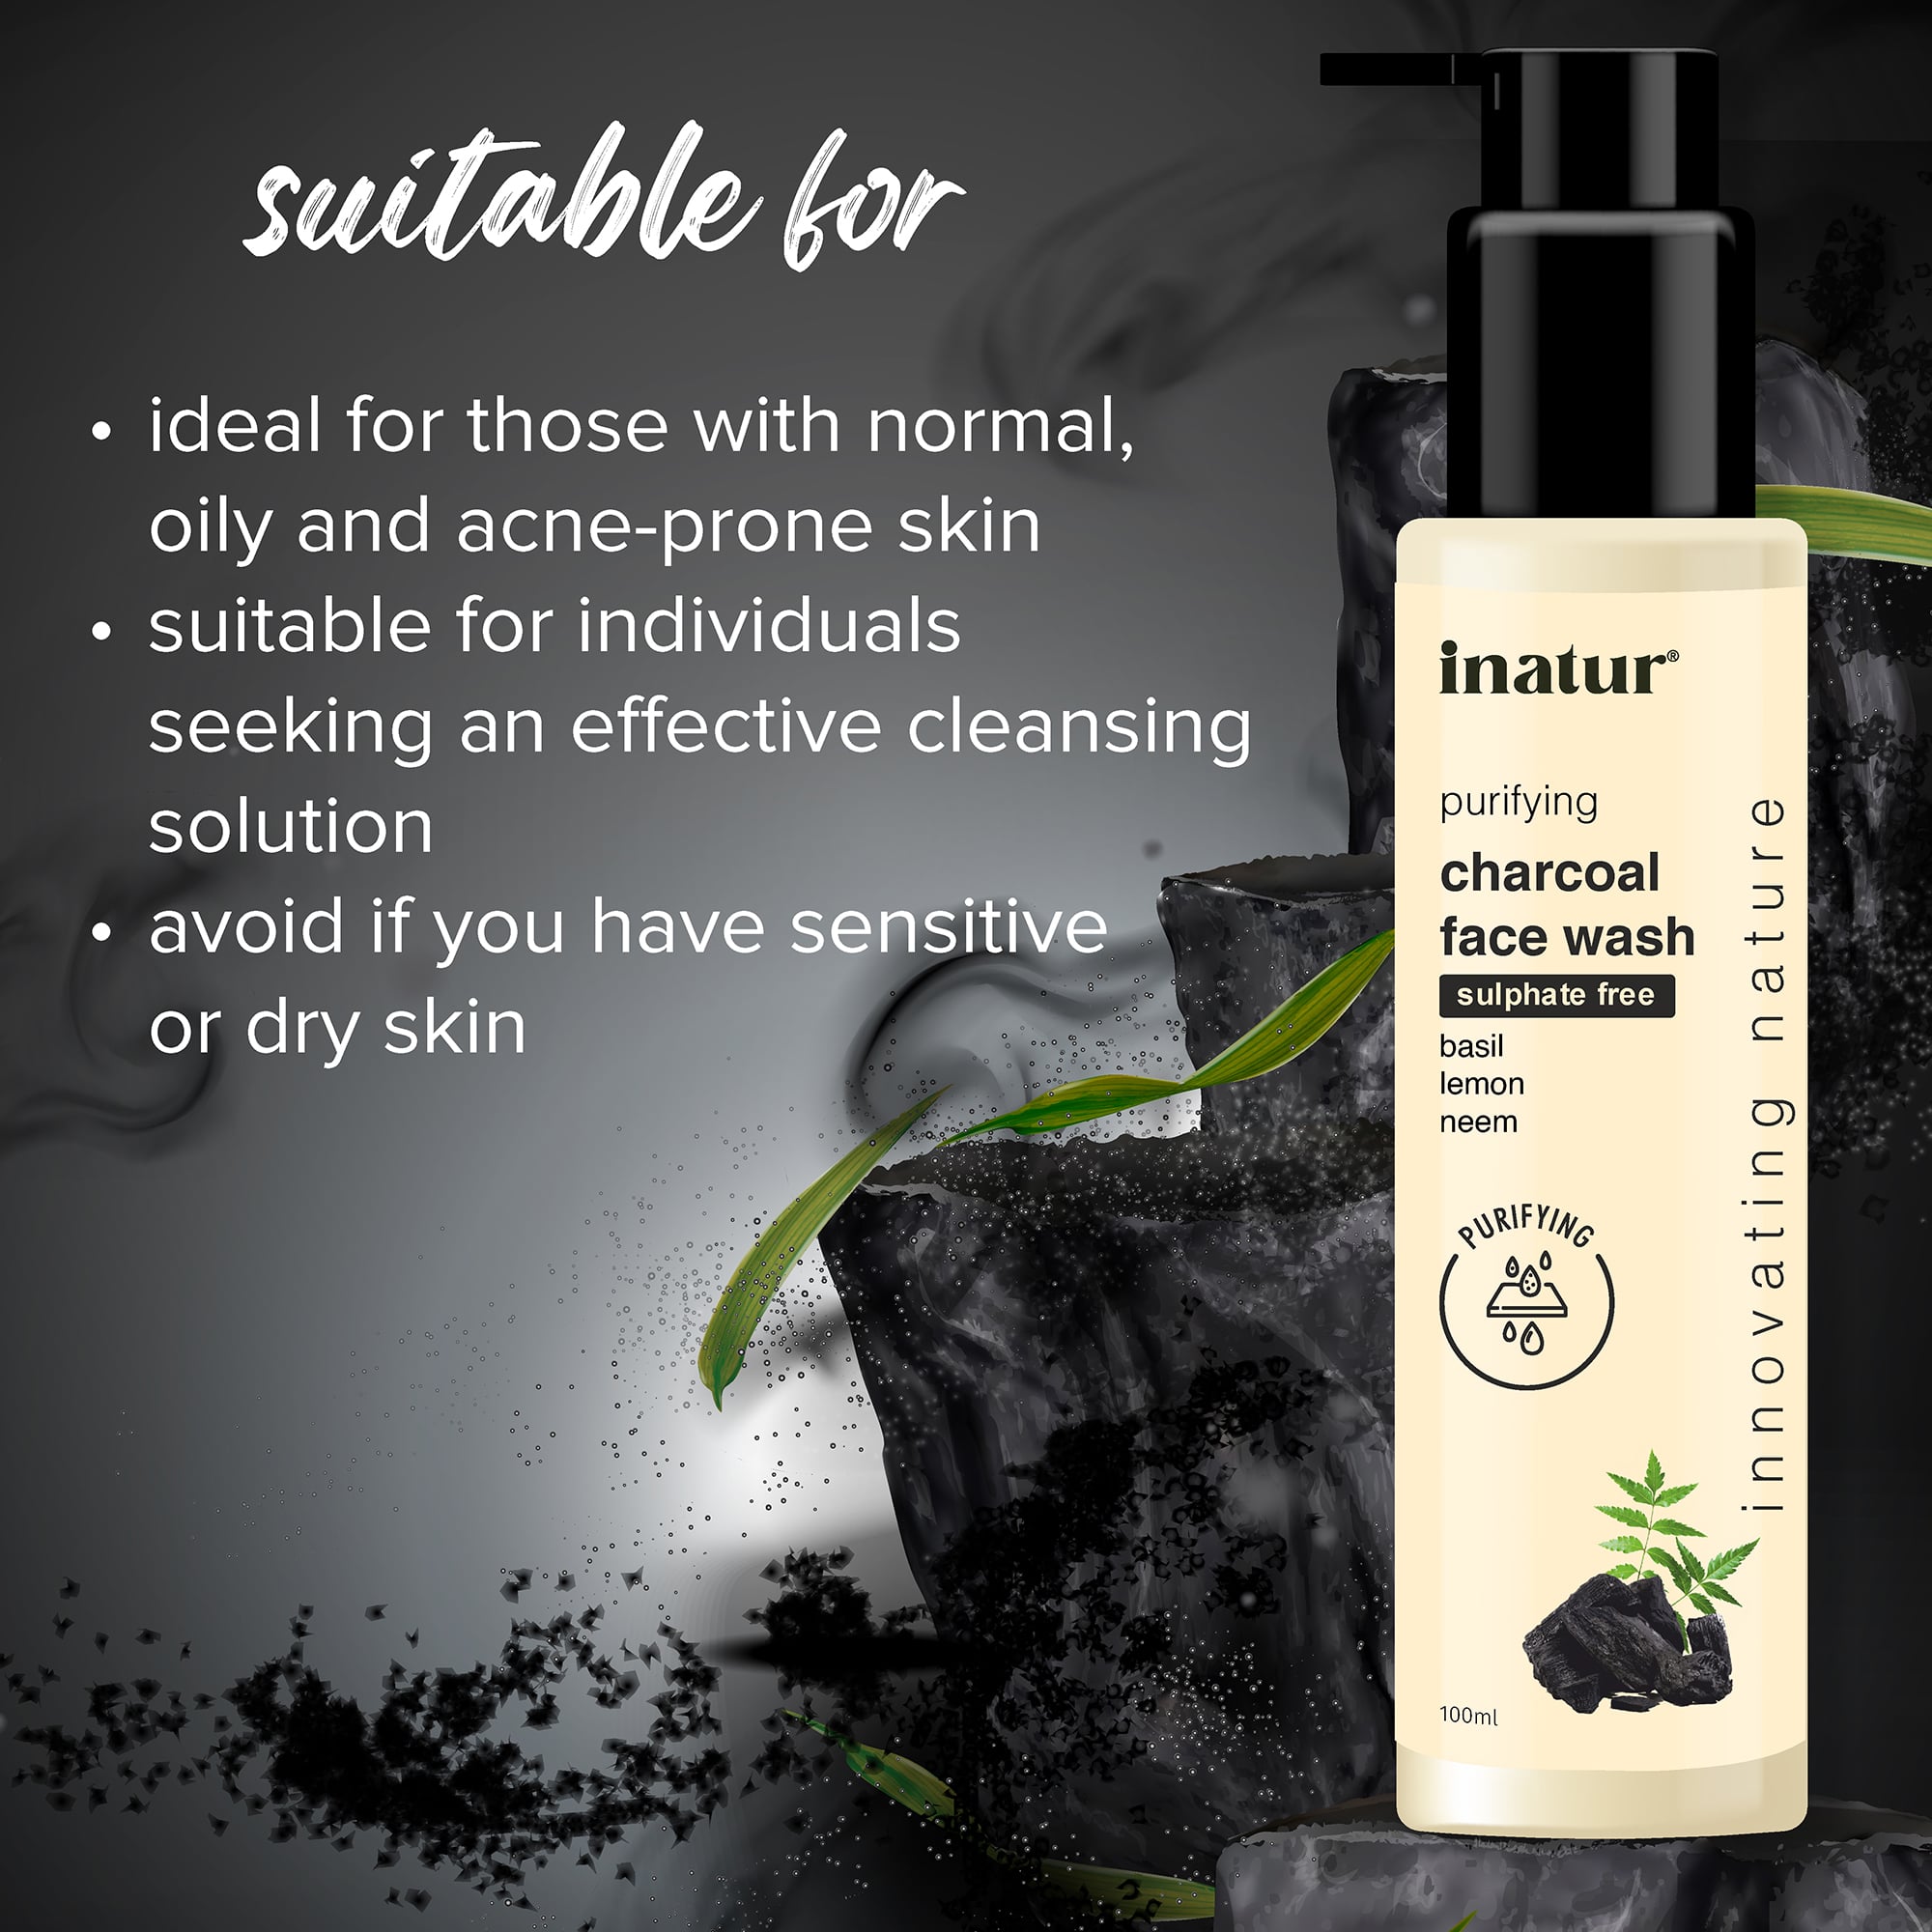 inatur charcoal face wash suitable for